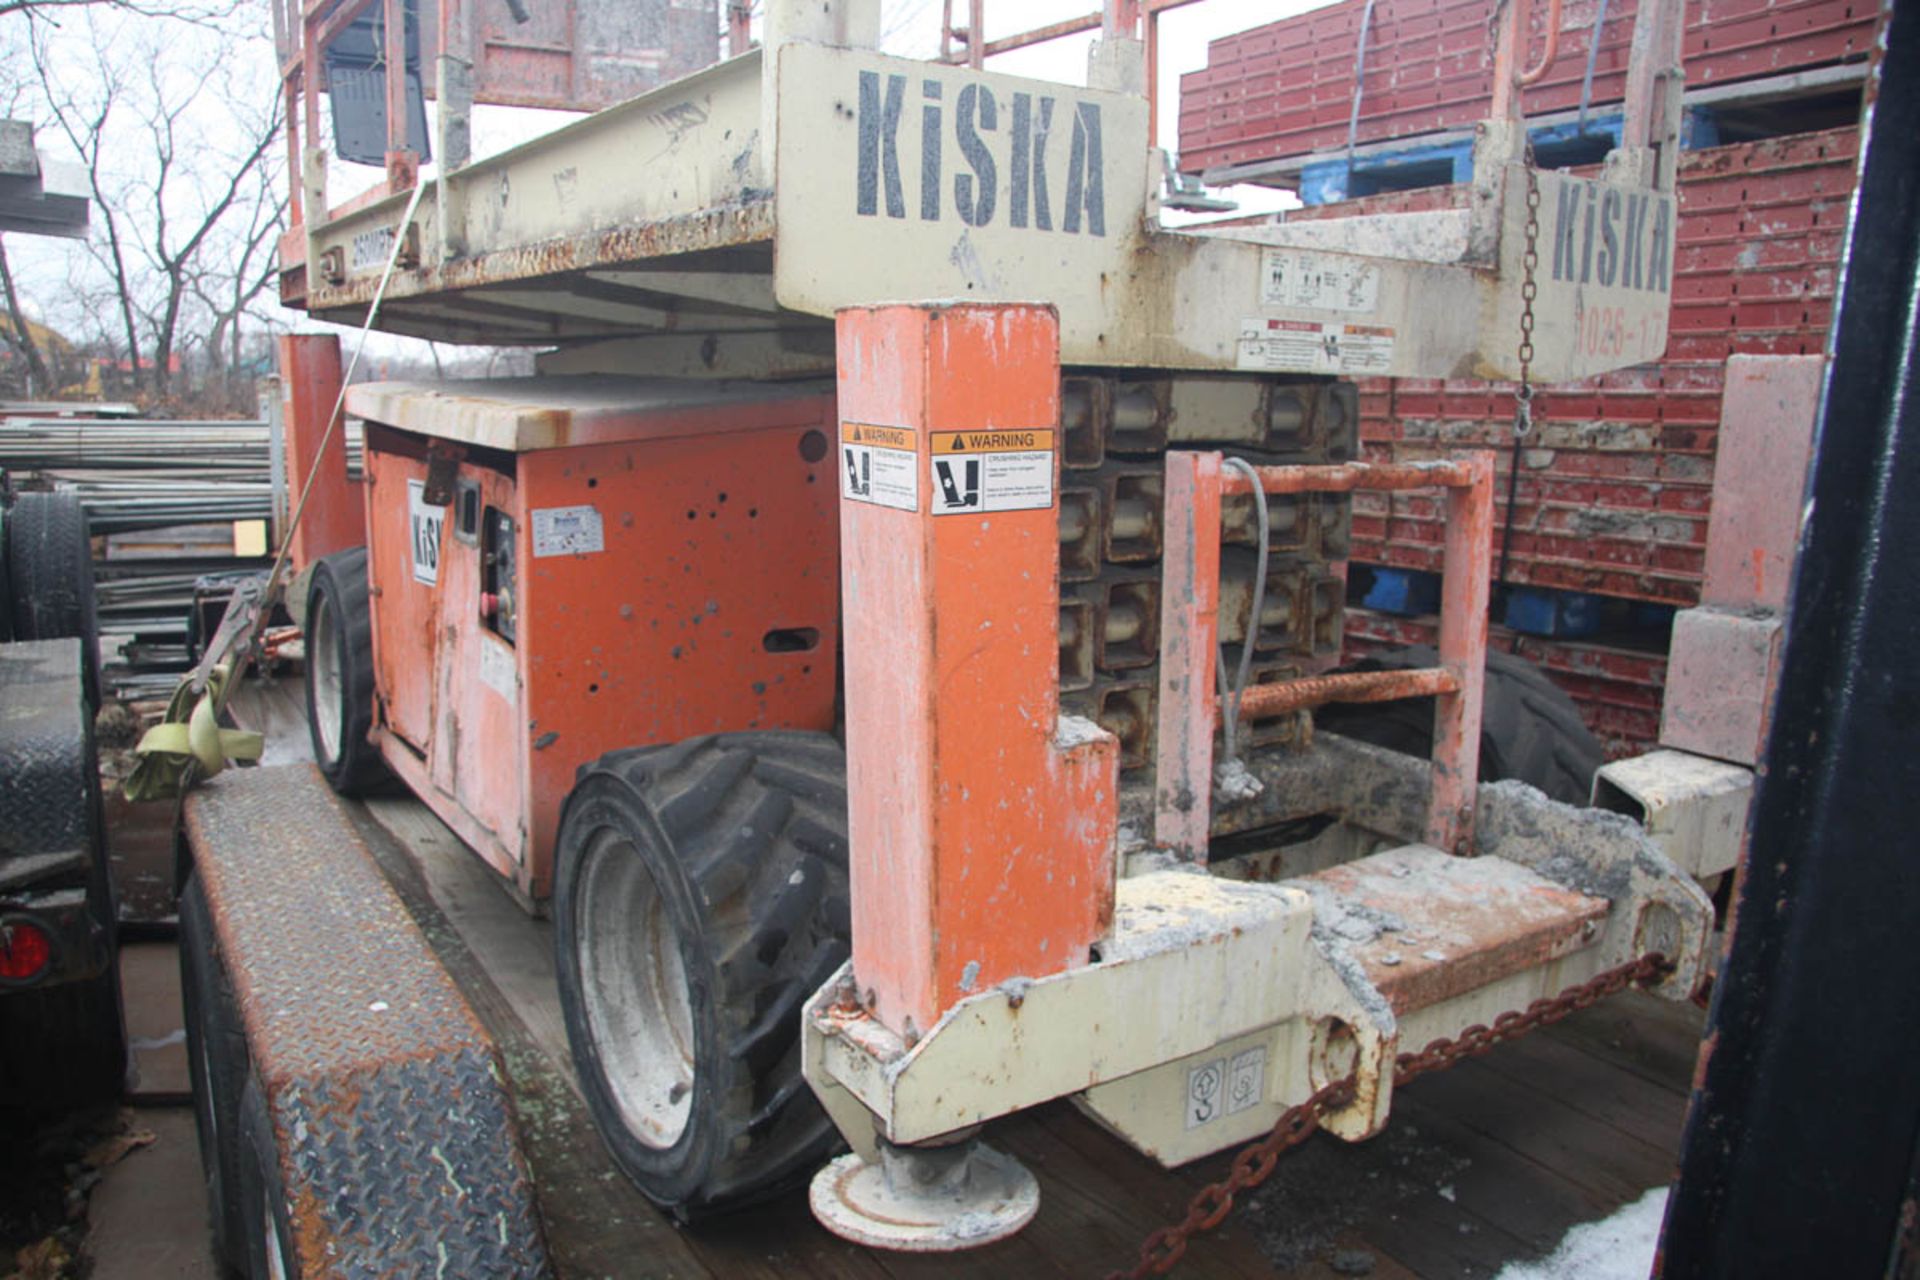 JLG 260MRT SCISSOR LIFT, 26' MAX PLATFORM HEIGHT, 1250# CAPACITY, APPROXIMATELY 2830 HOURS, S/N: N/A - Image 3 of 9